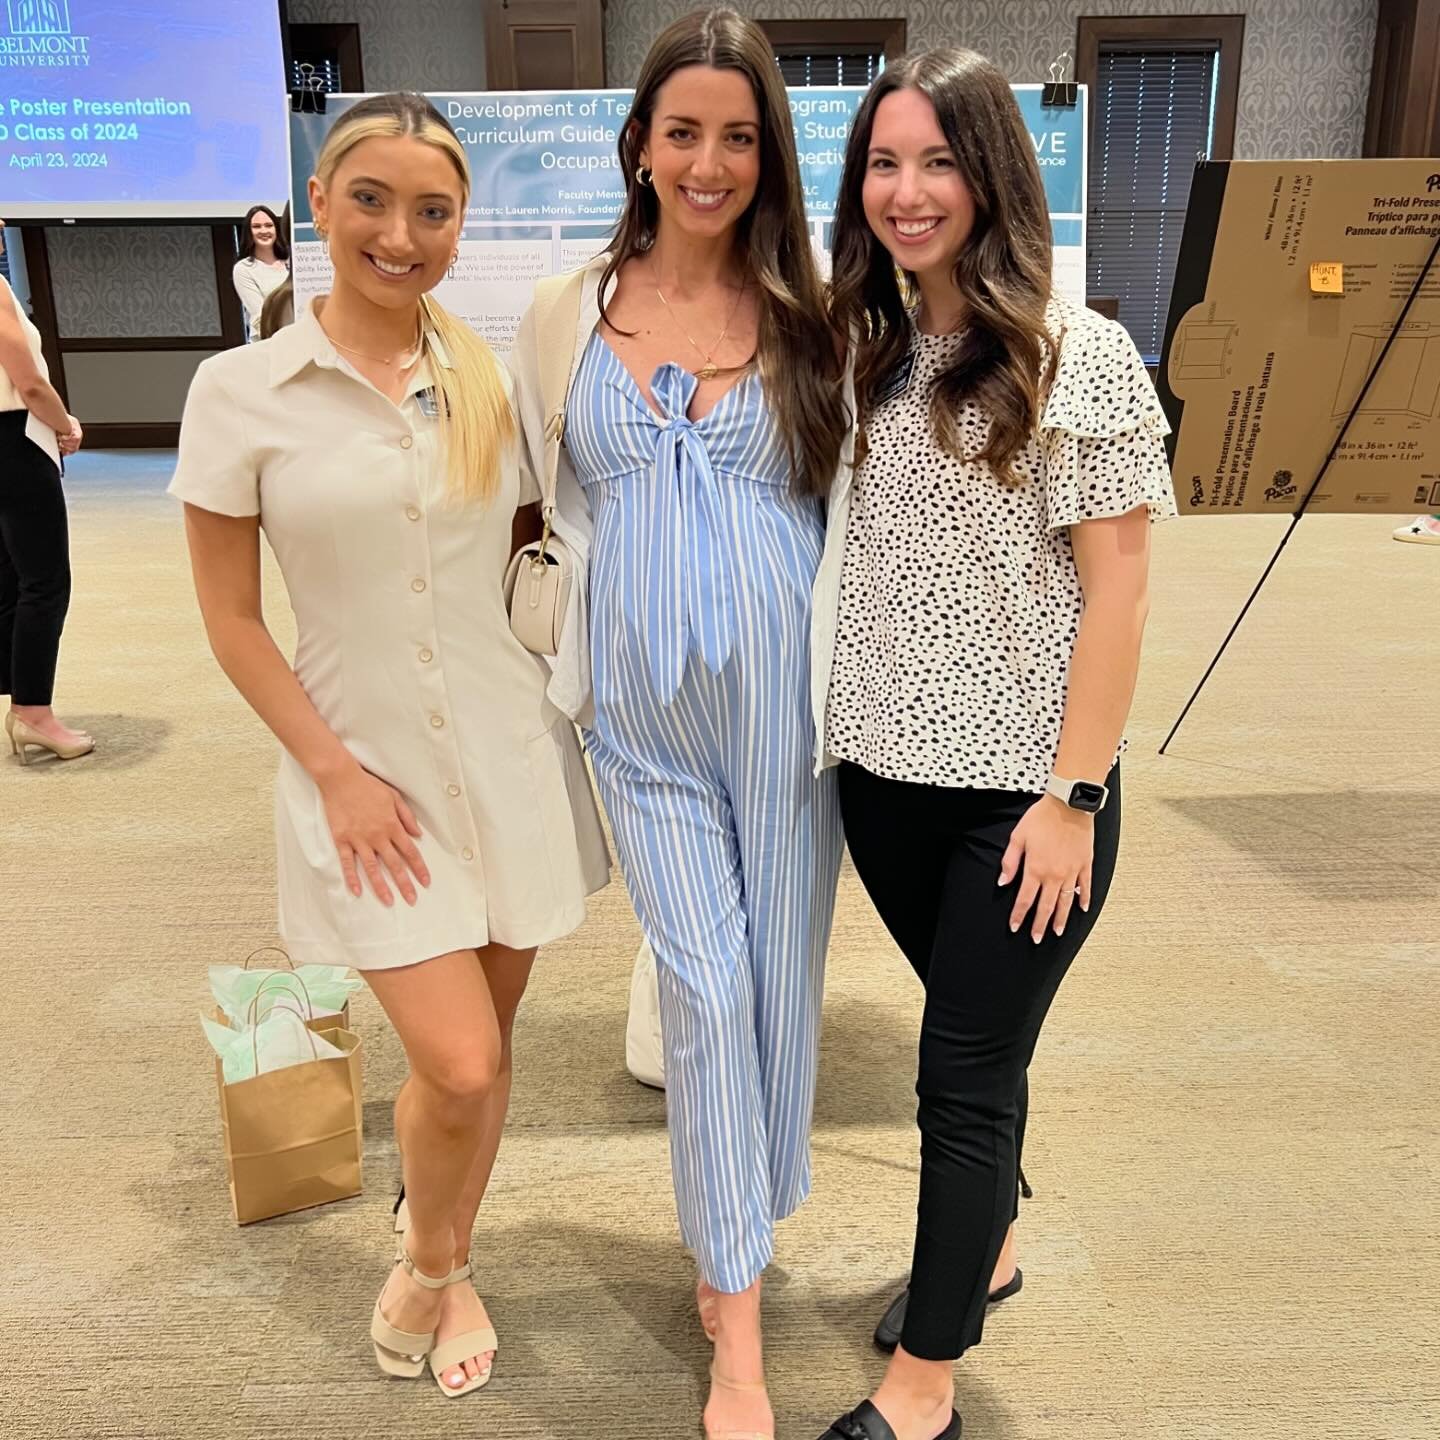 So proud of these two! This semester, we had the pleasure of working with Susanna and Sidney, two future Occupational Therapists from @belmontu. Susanna helped us build a new framework for training future teachers at MOVE Inclusive Dance while Sidney